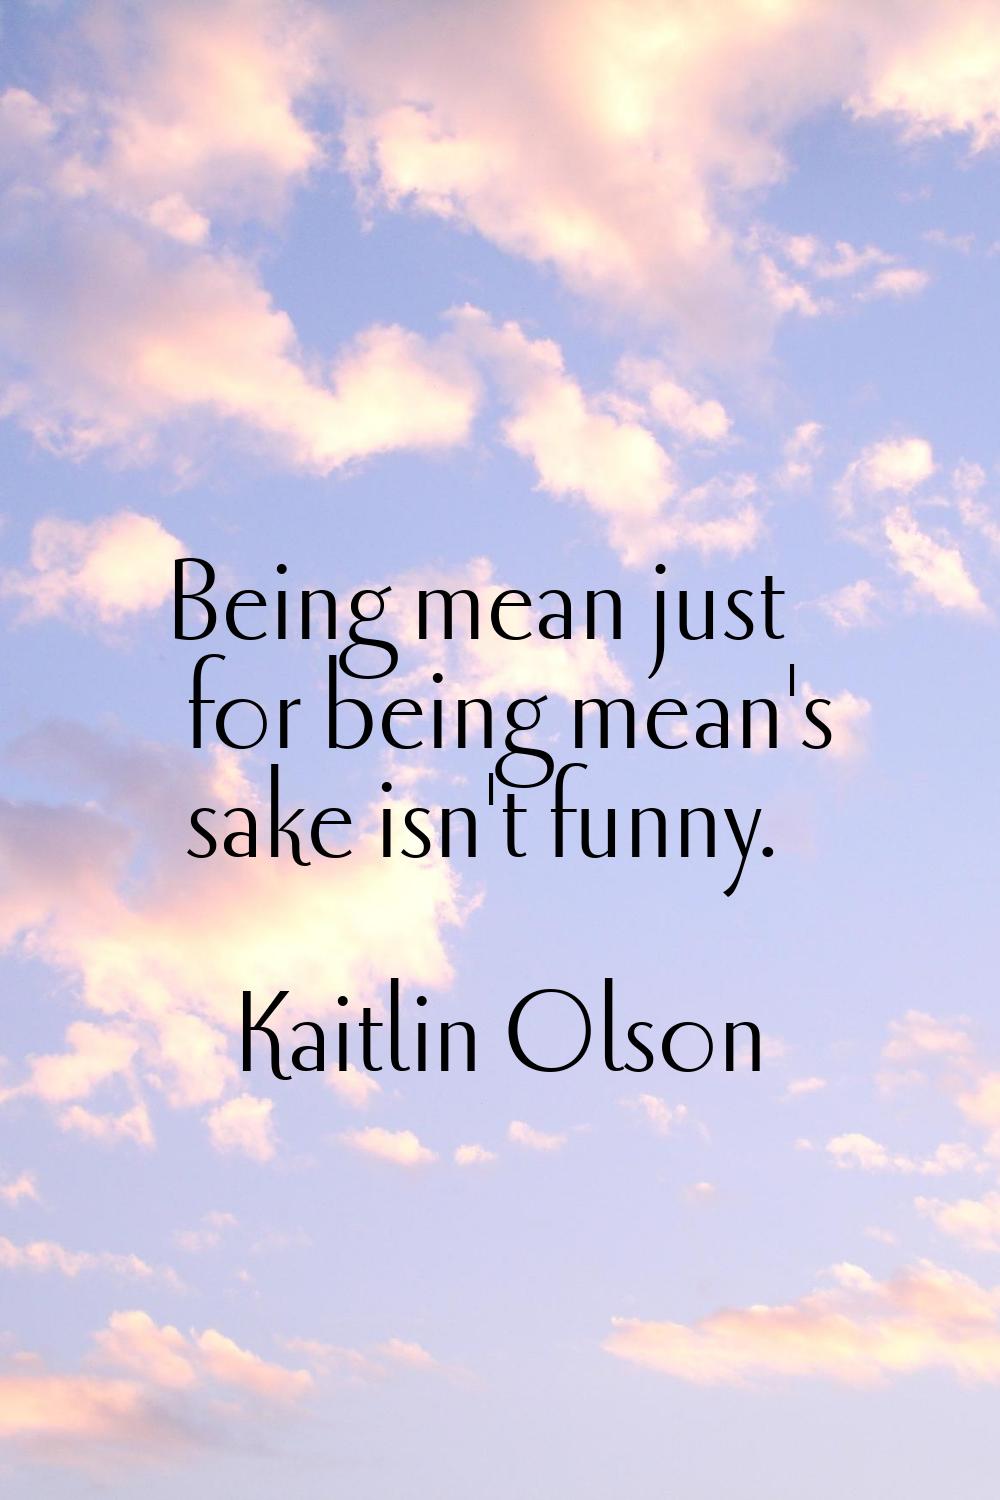 Being mean just for being mean's sake isn't funny.